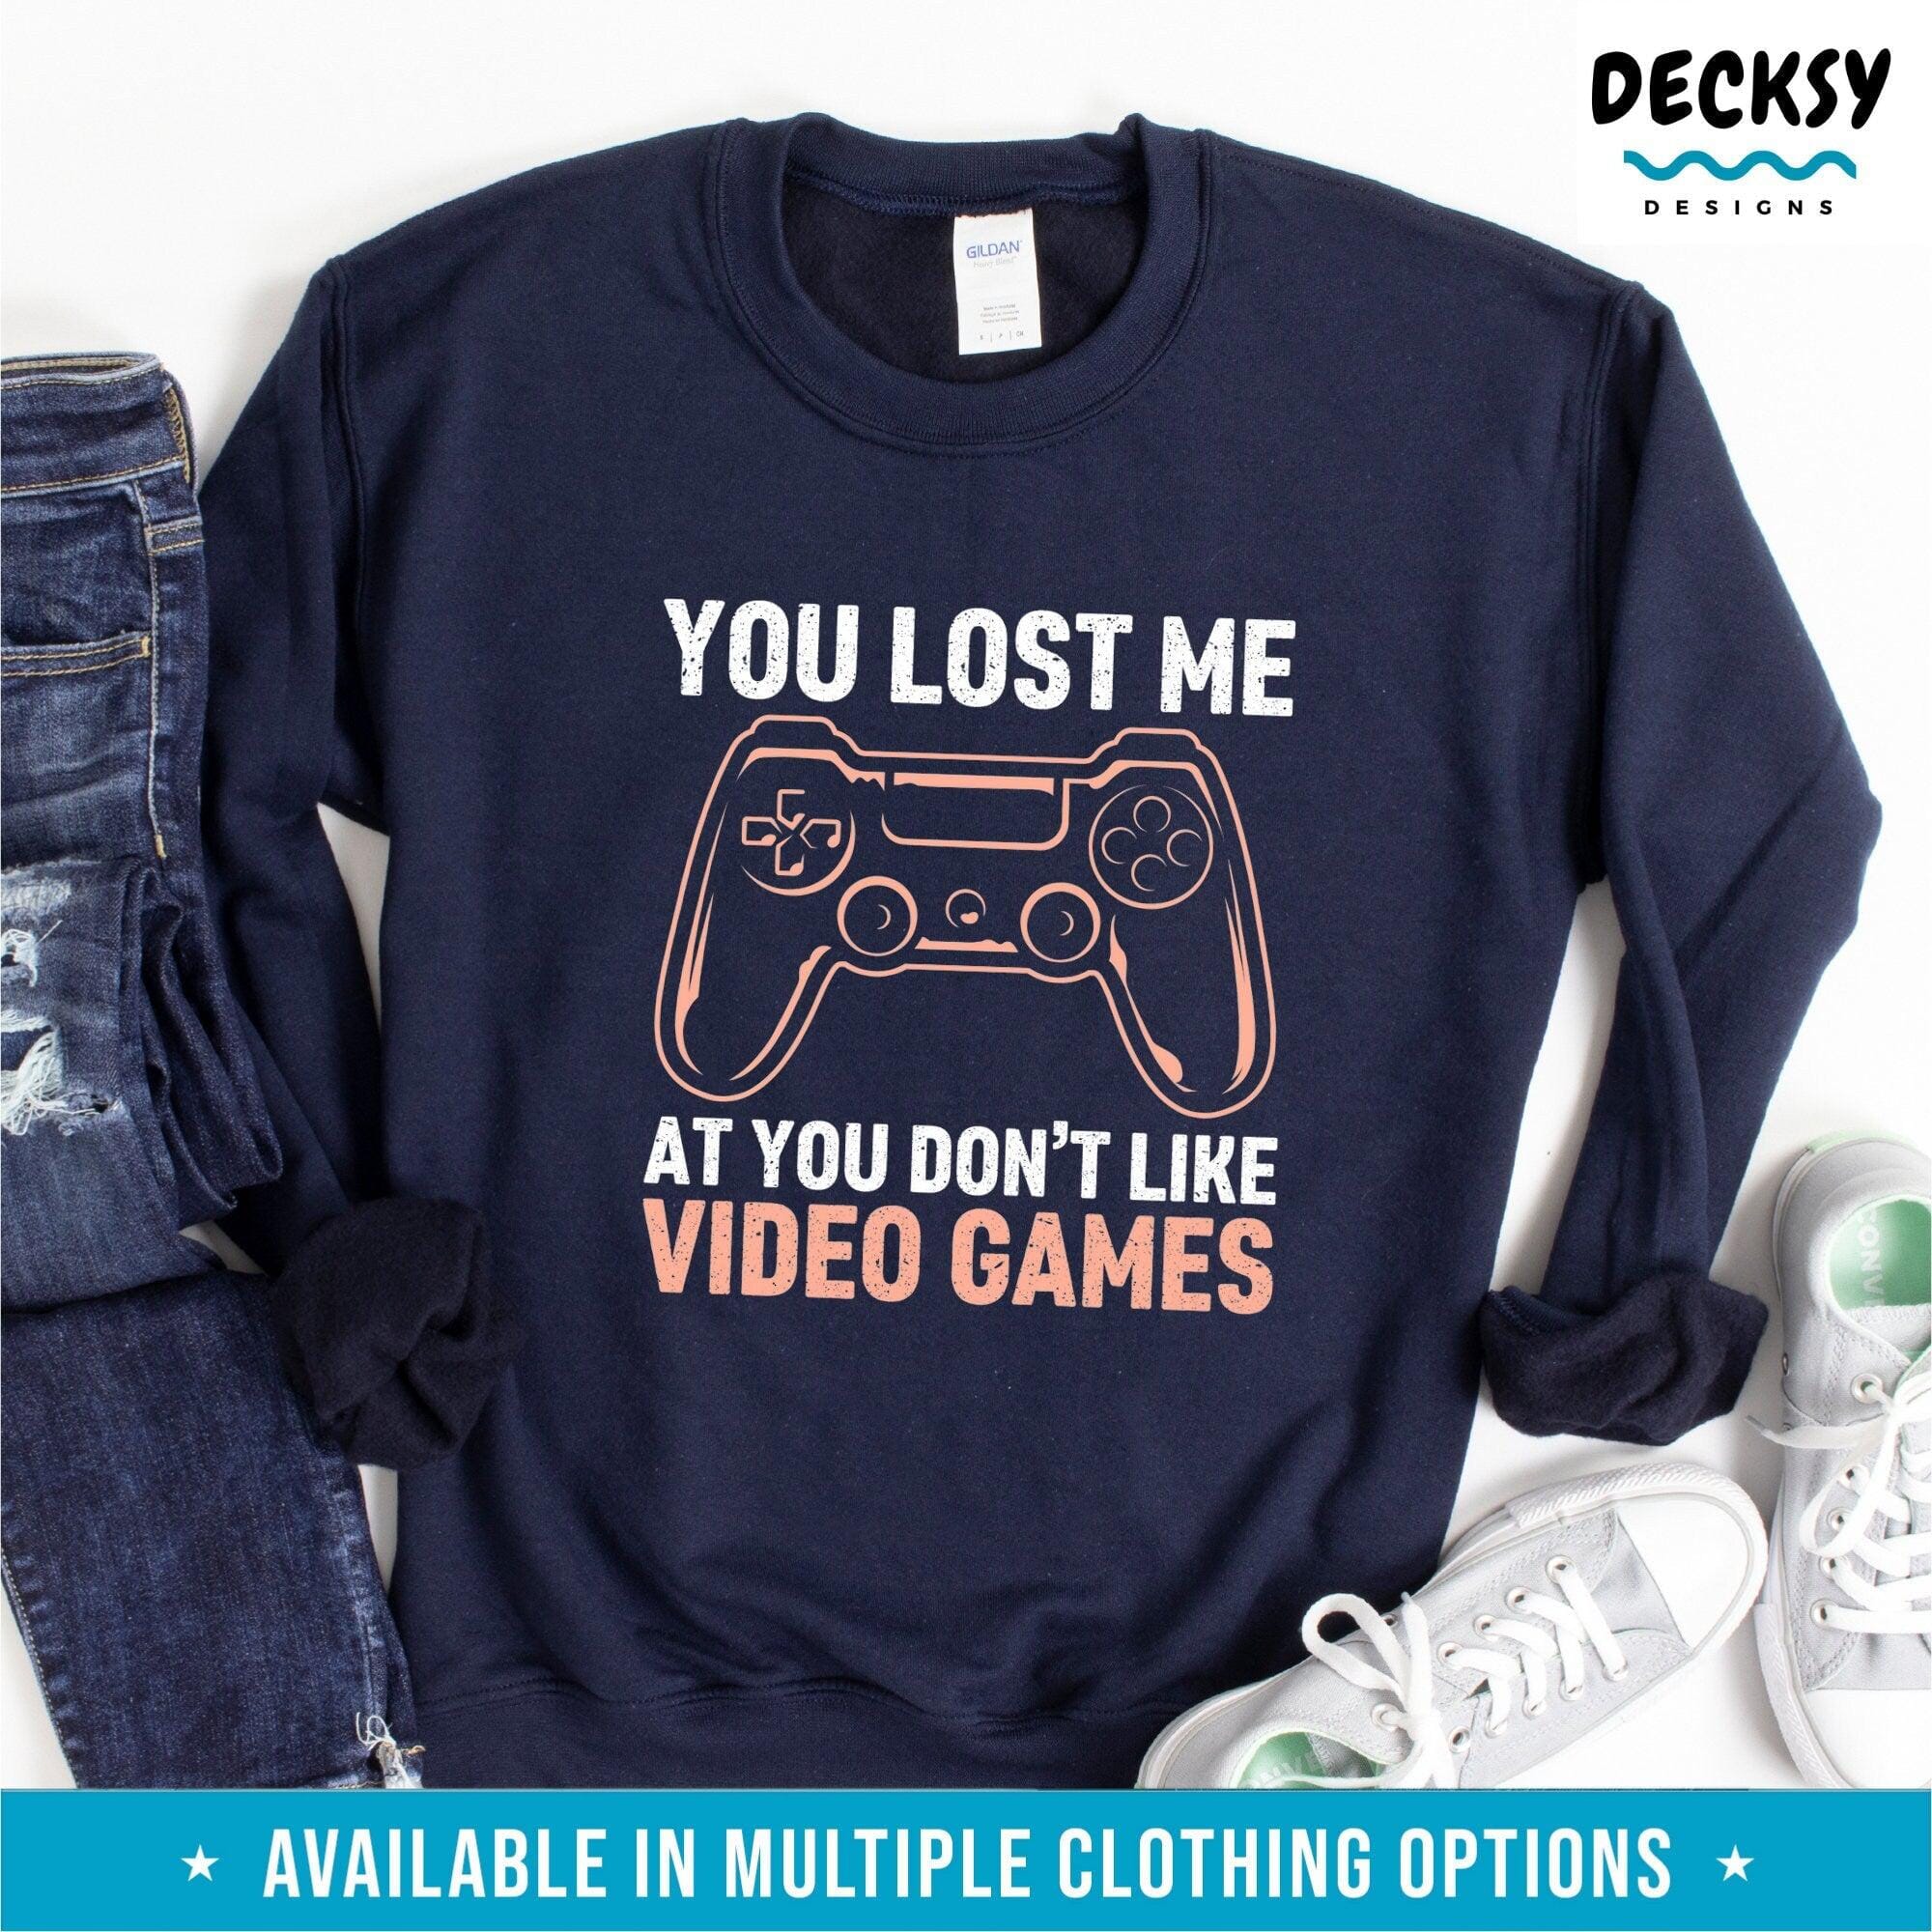 Gaming Shirt, Video Game Lover Gift-Clothing:Gender-Neutral Adult Clothing:Tops & Tees:T-shirts:Graphic Tees-DecksyDesigns